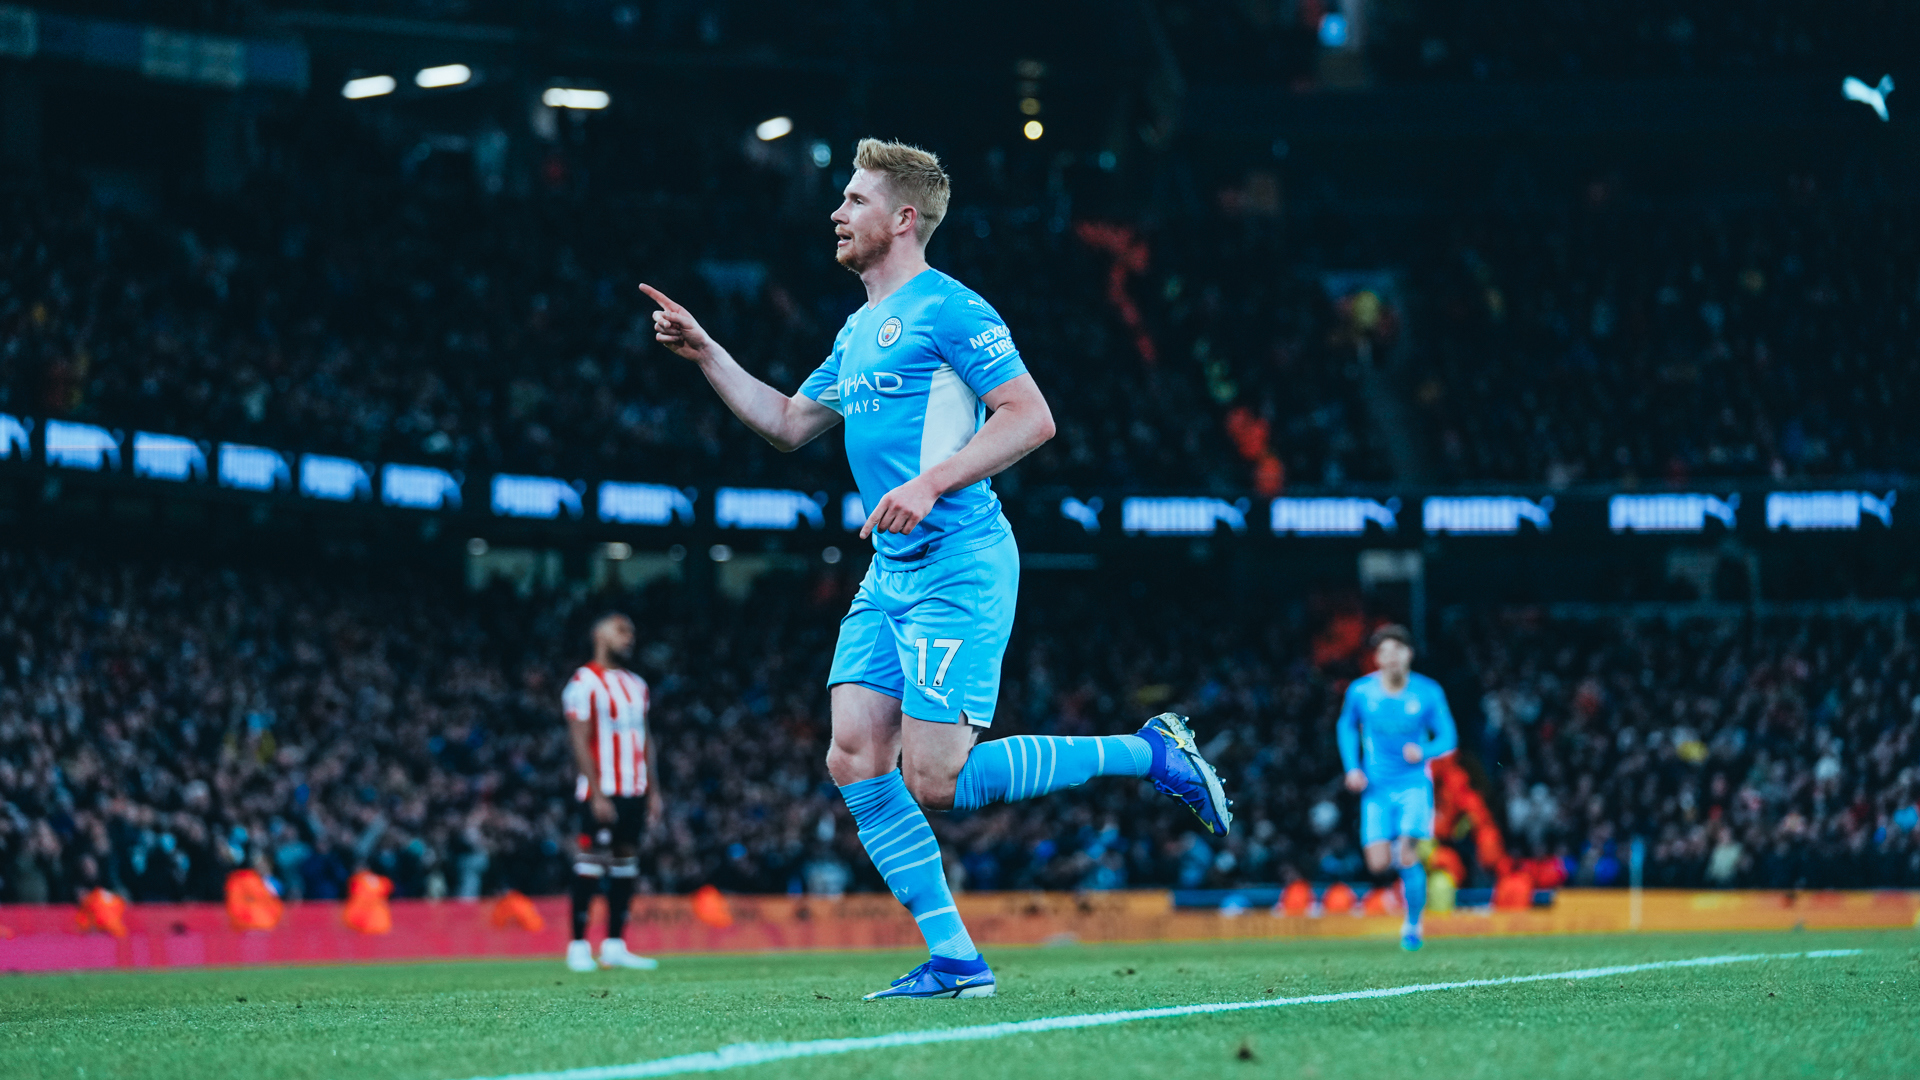 DOUBLE DELIGHT: Kevin De Bruyne celebrates after his crucial goal